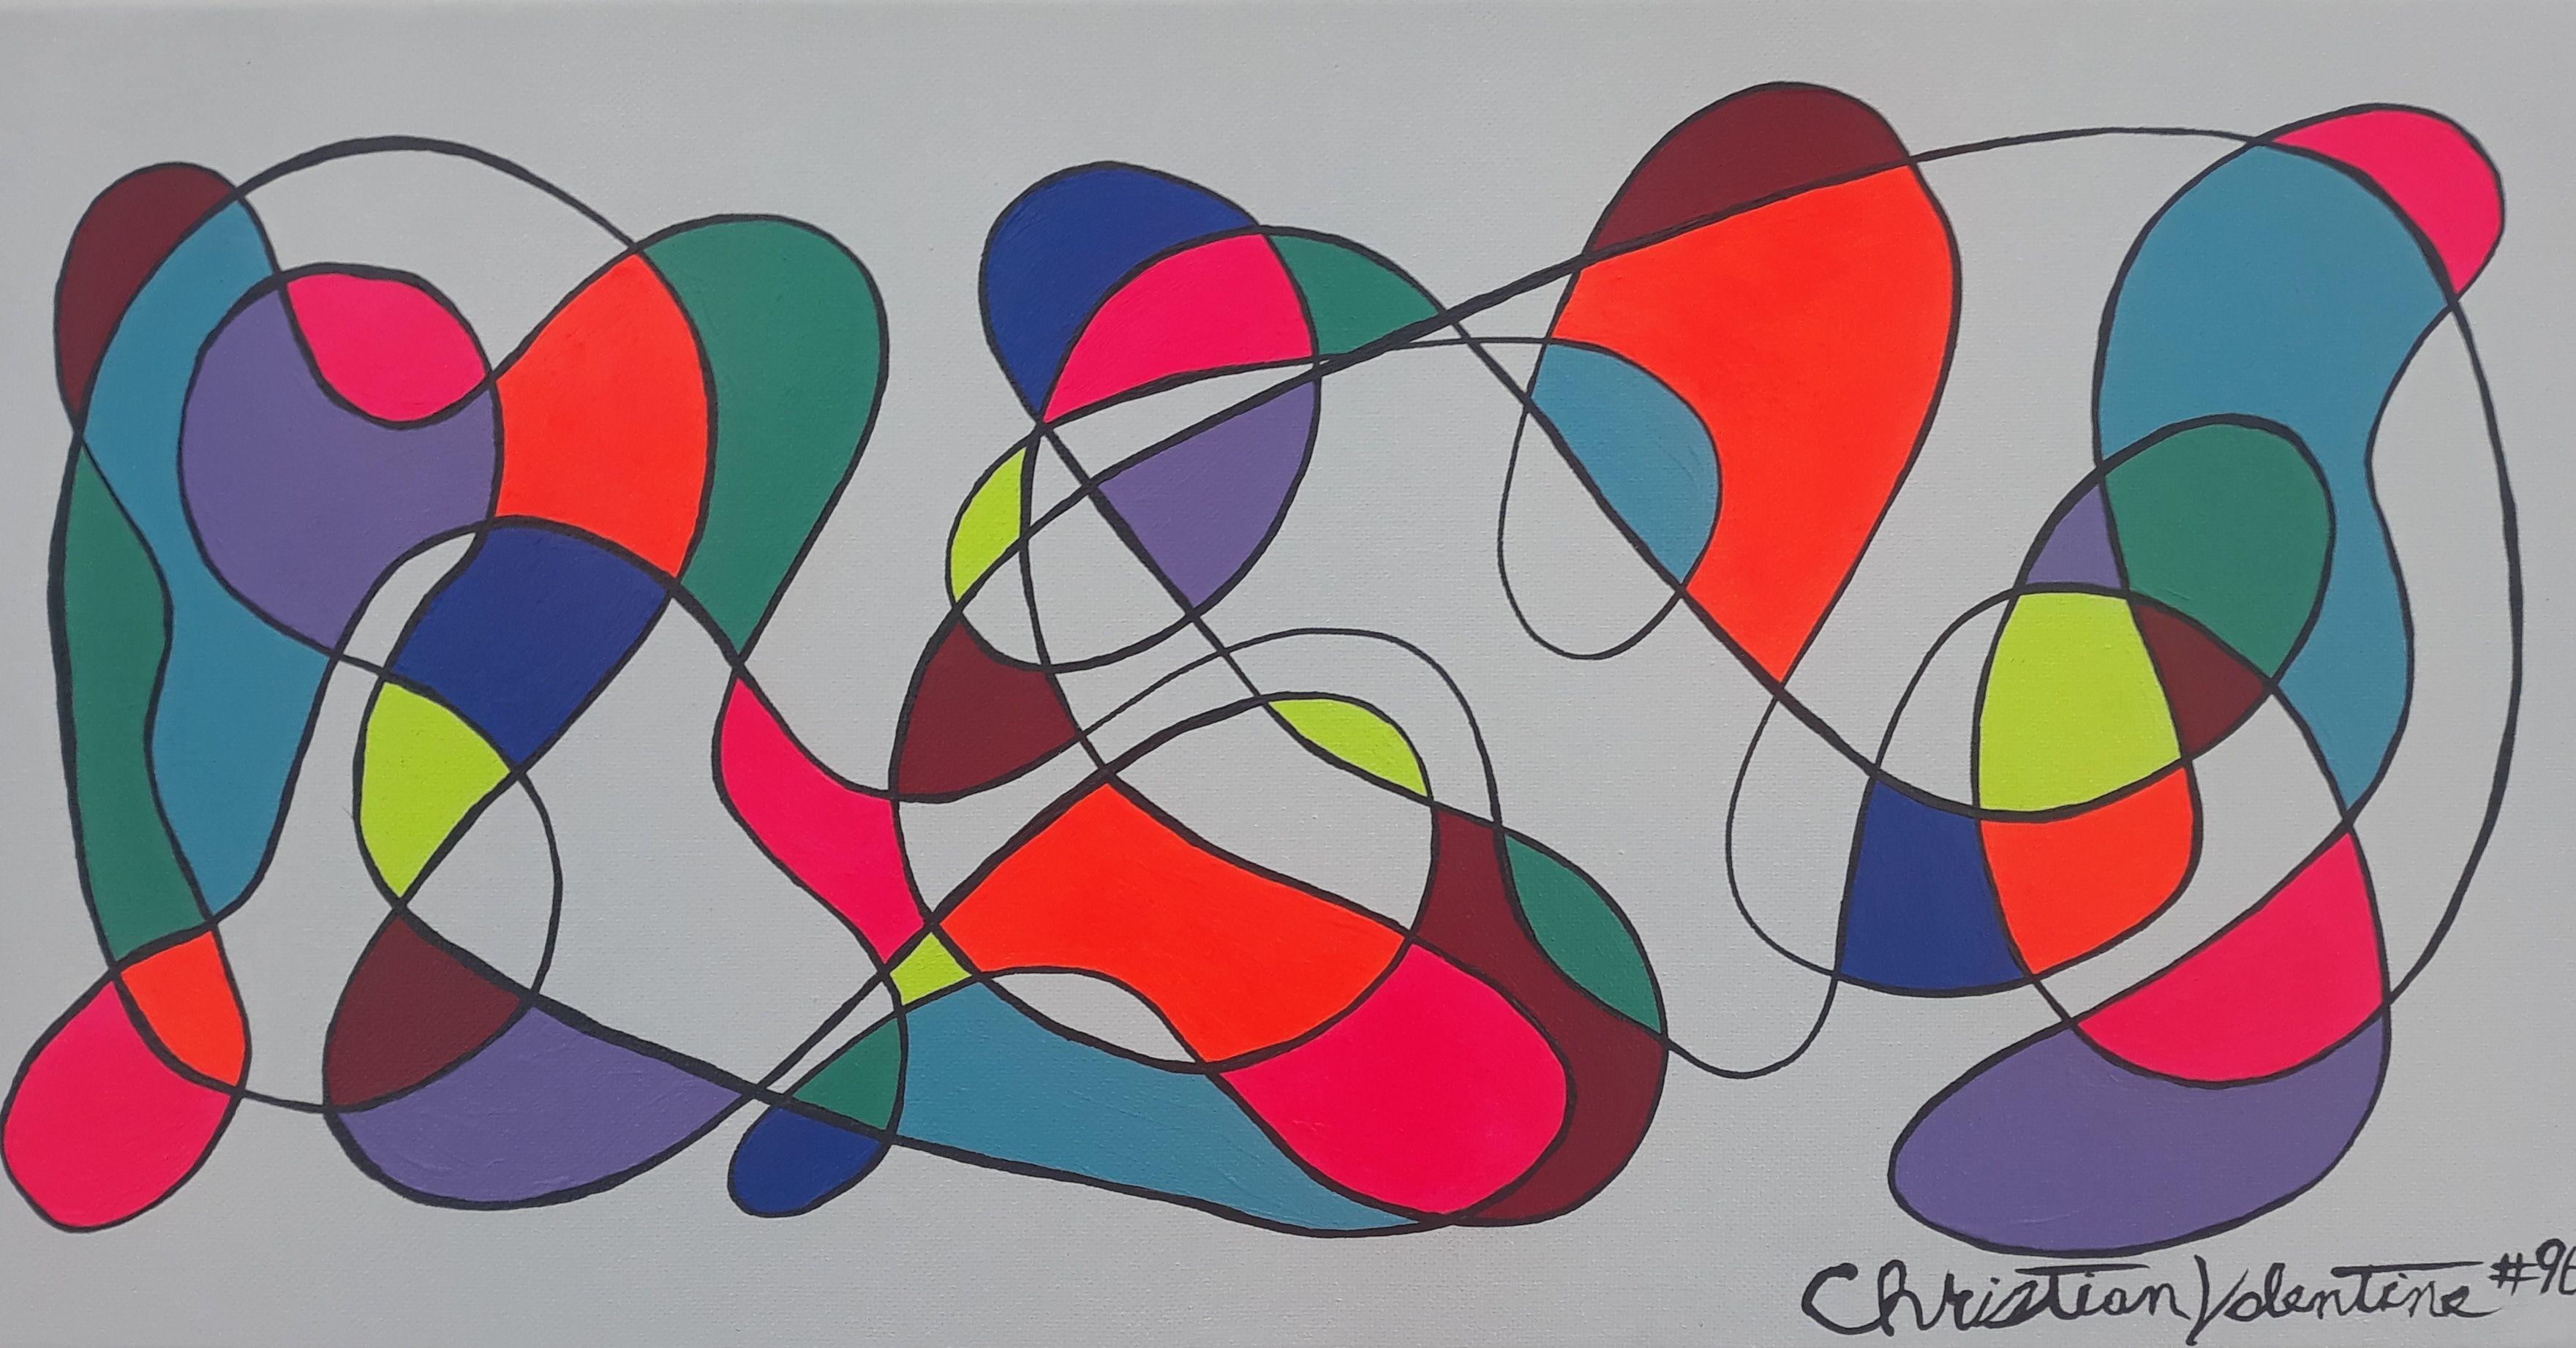 Christian Valentine Abstract Painting - Easter, Painting, Acrylic on Canvas